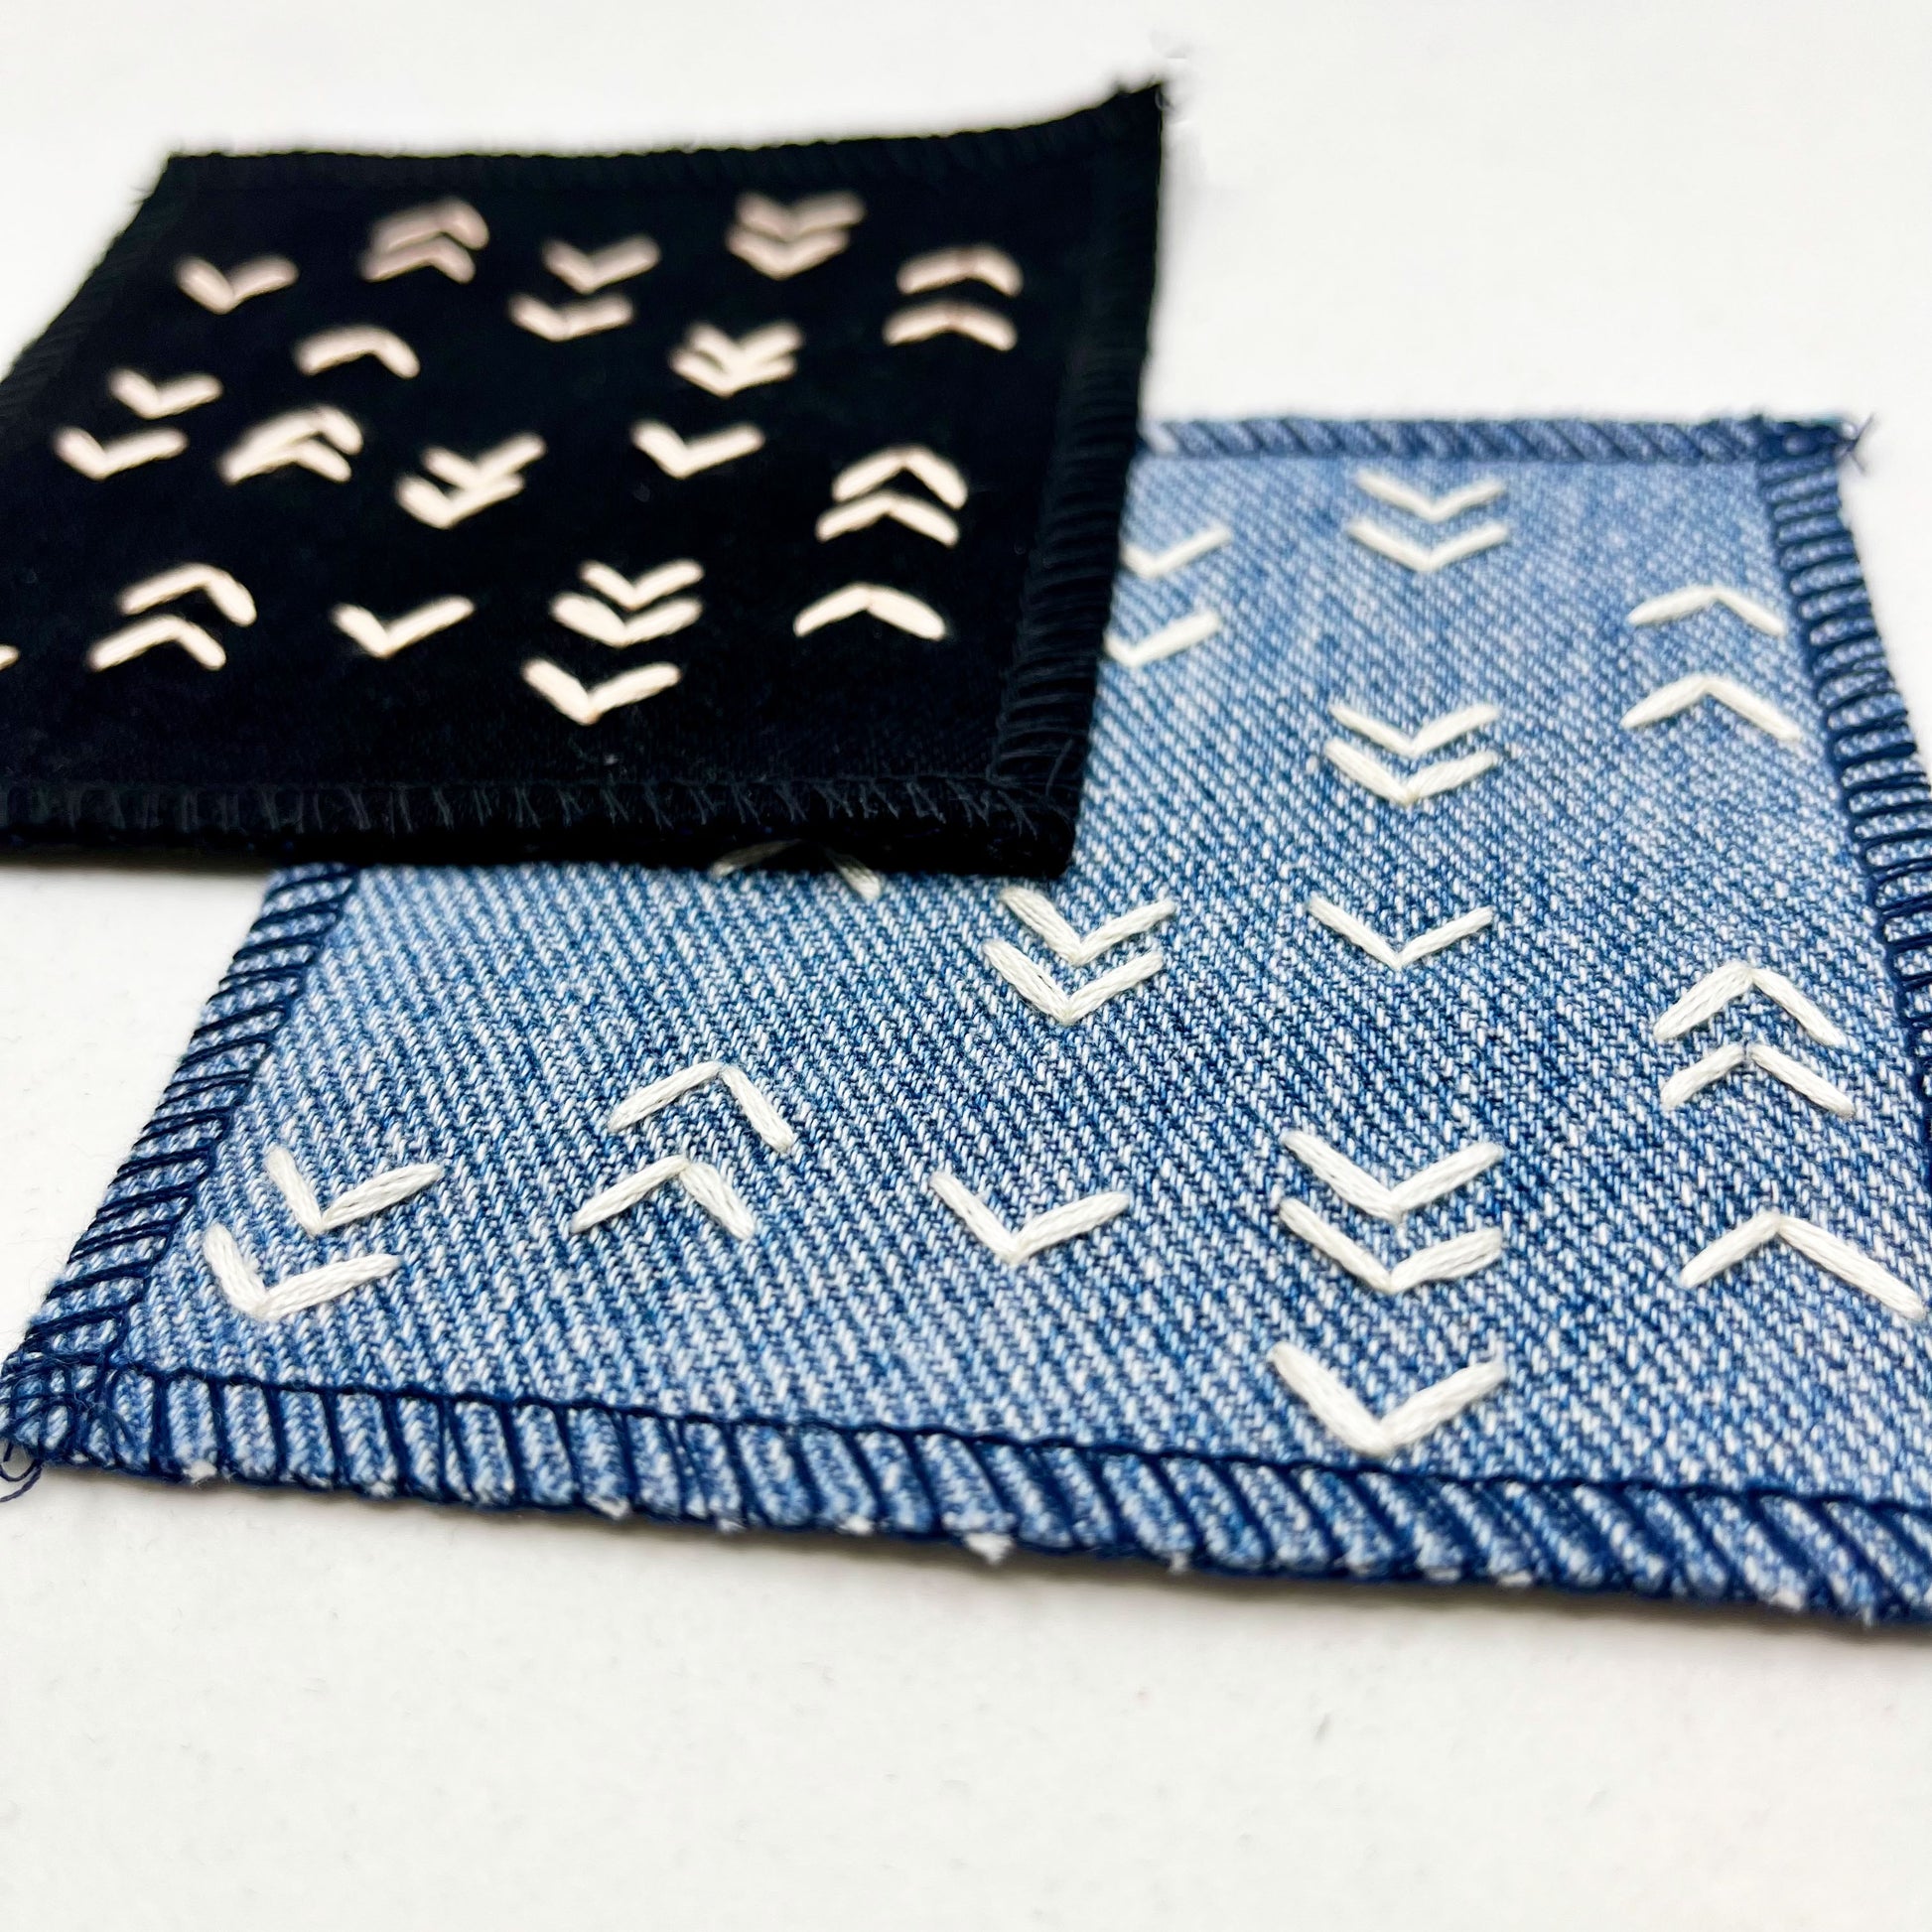 close up angled view of two square denim patches, one black one blue, hand stitched in peach and ivory respectively with rows of unevenly spaced small chevrons facing different directions on a white background